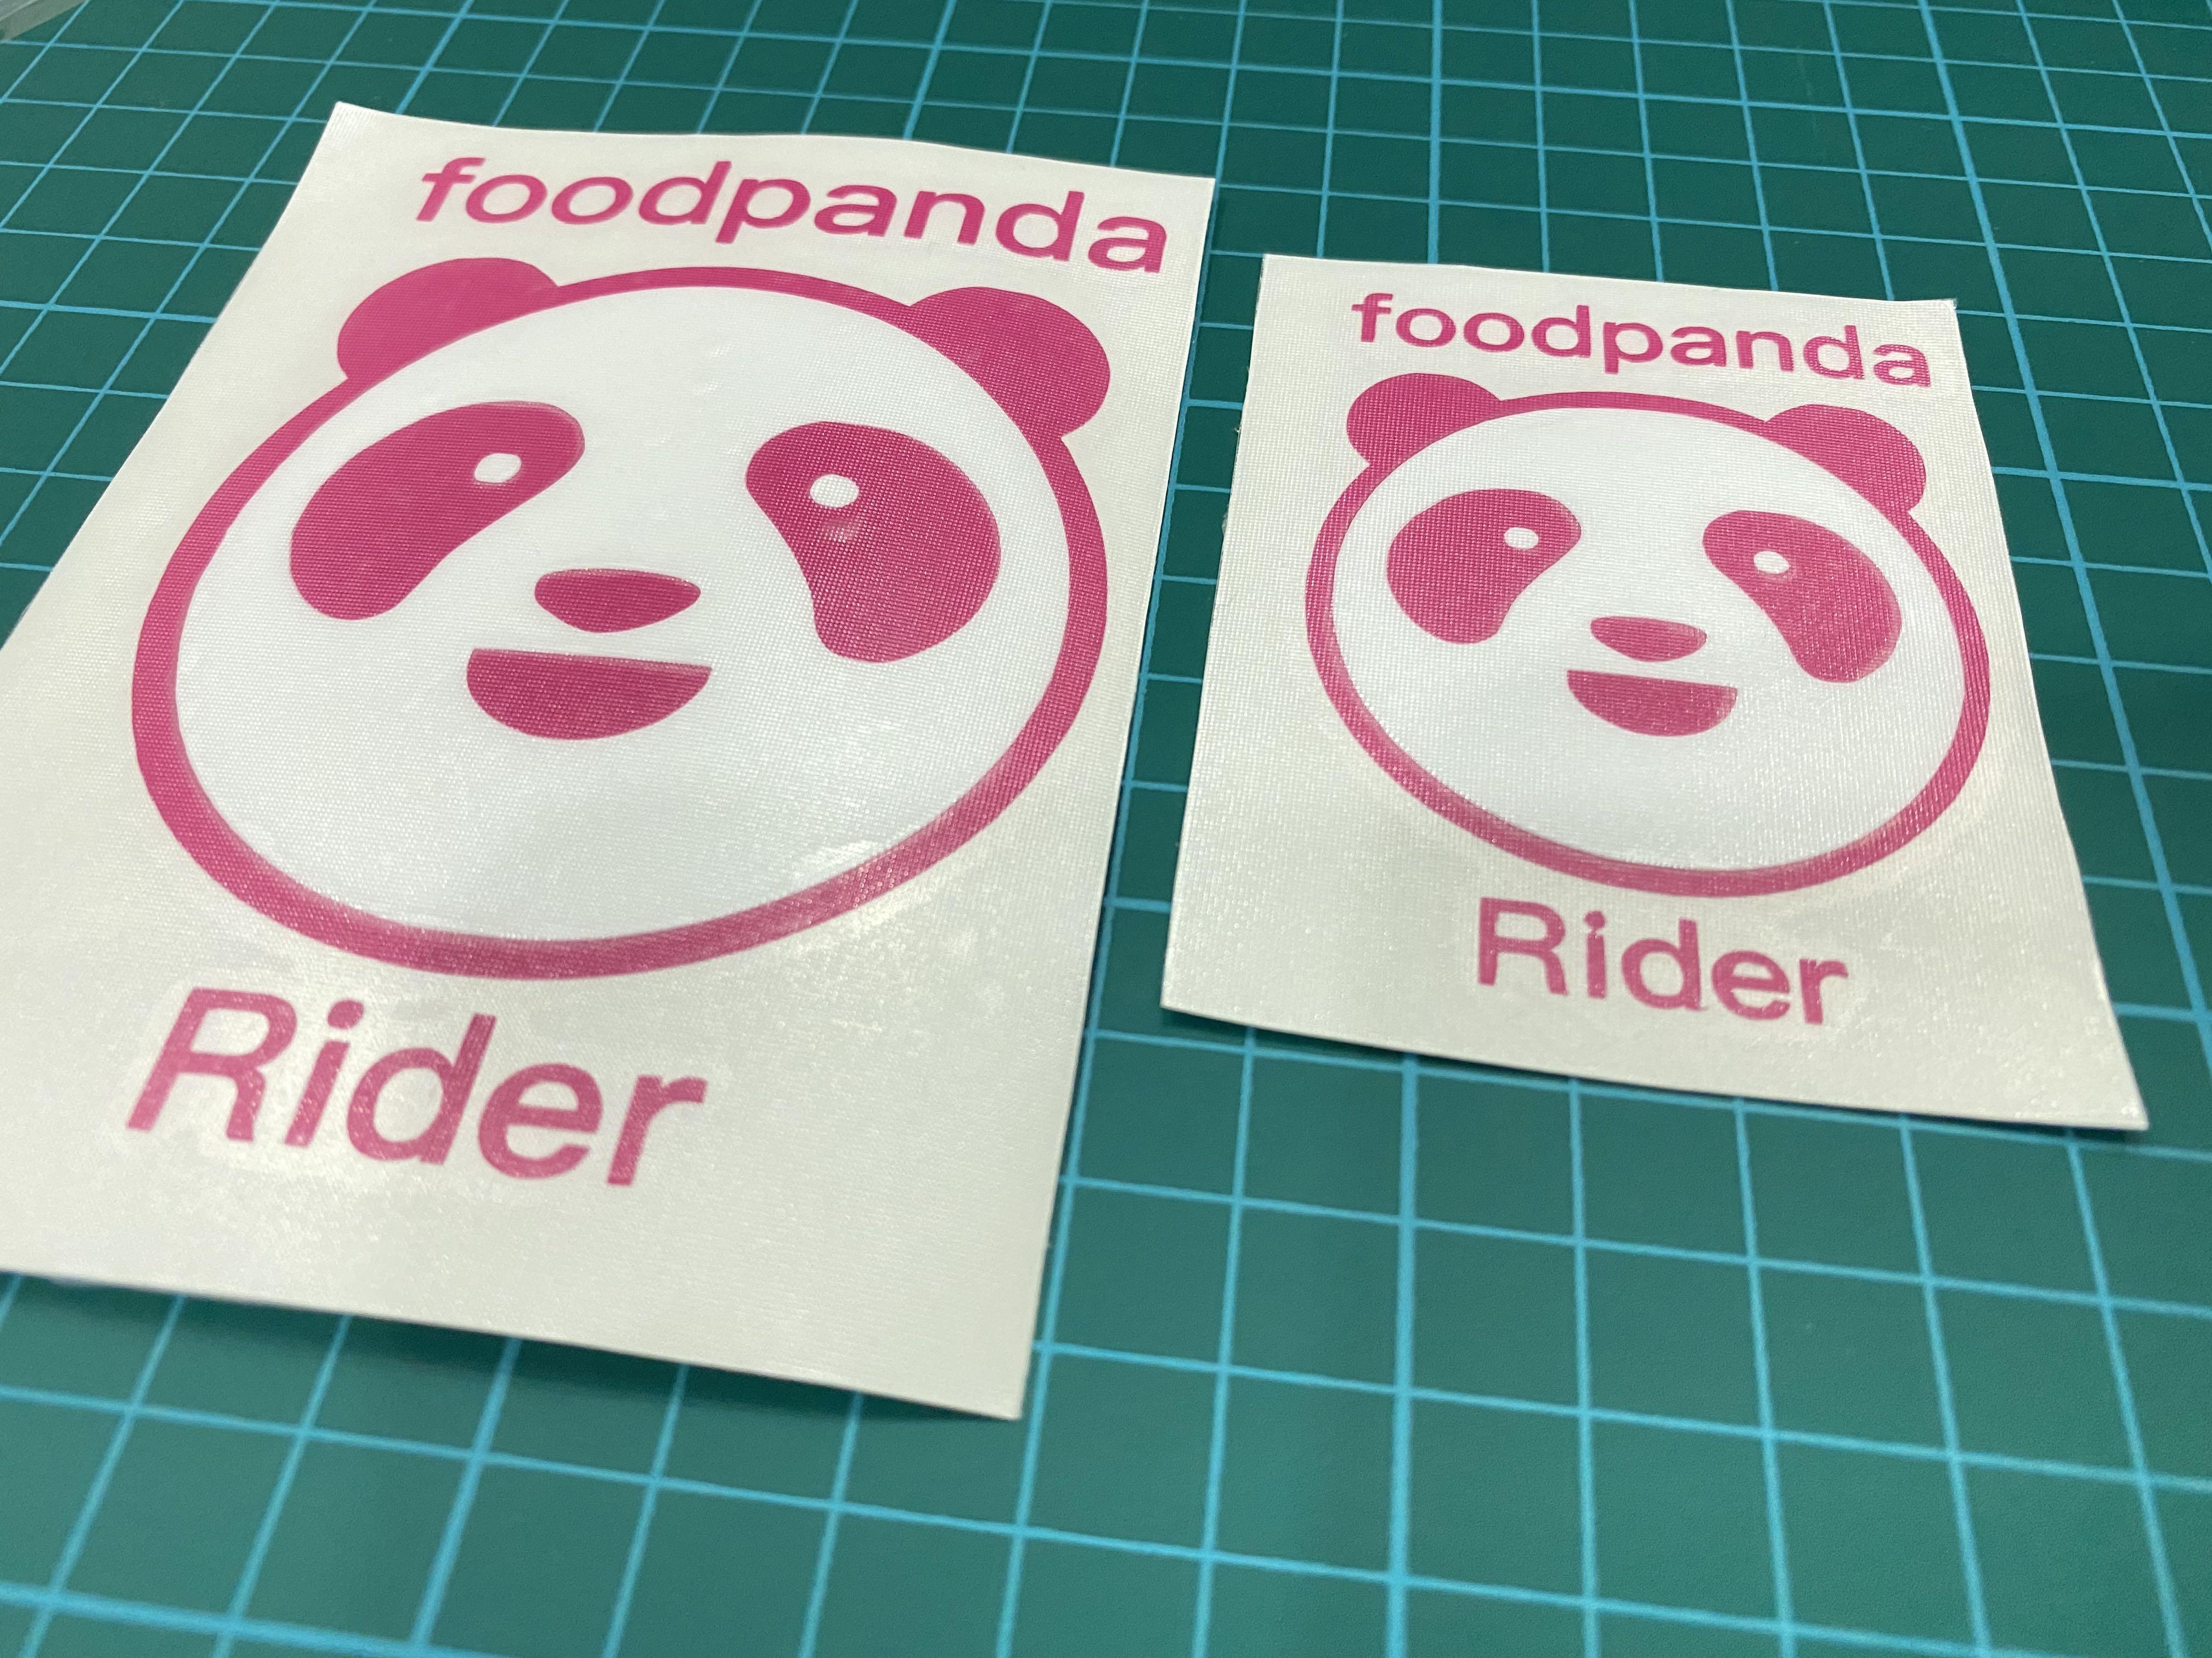 Order A Takeaway With foodpanda And Earn Up To 1,200 Asia Miles!